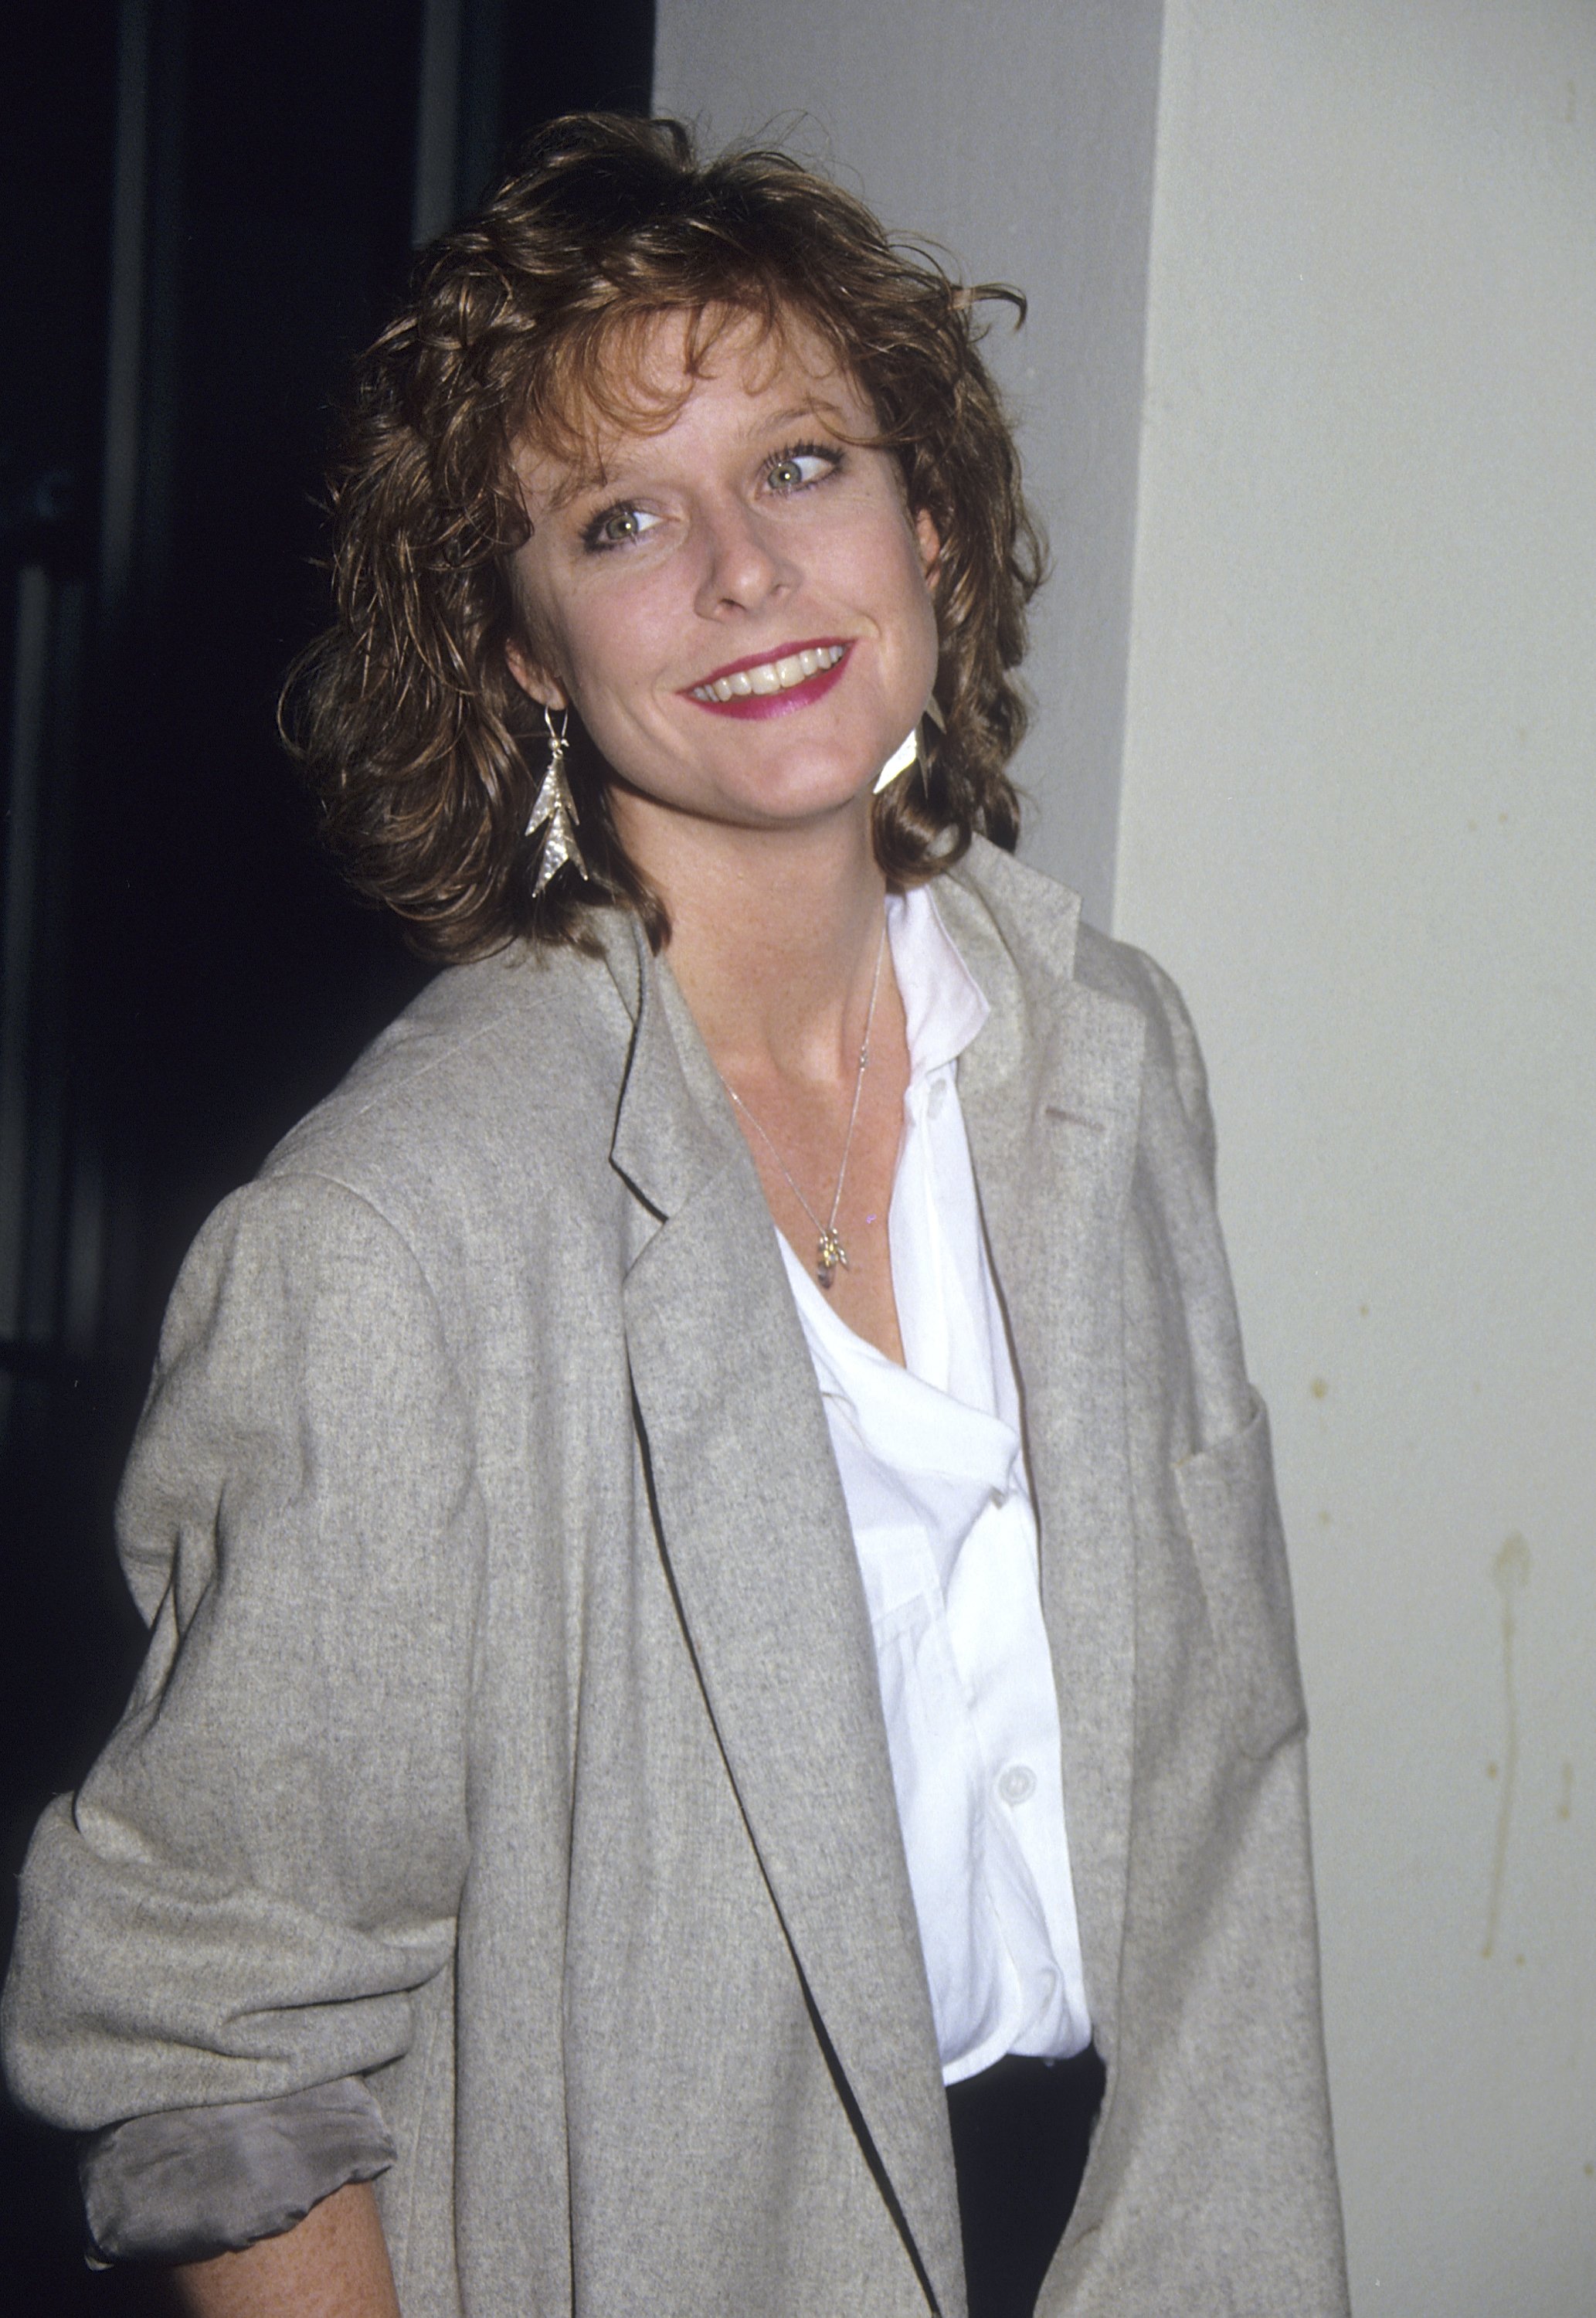 Actress Mary McDonough attends the Screening of the ABC Made-for-Television Movie "Cracked Up" on May 18, 1987 at the WGA Theatre in Beverly Hills, California | Source: Getty Images